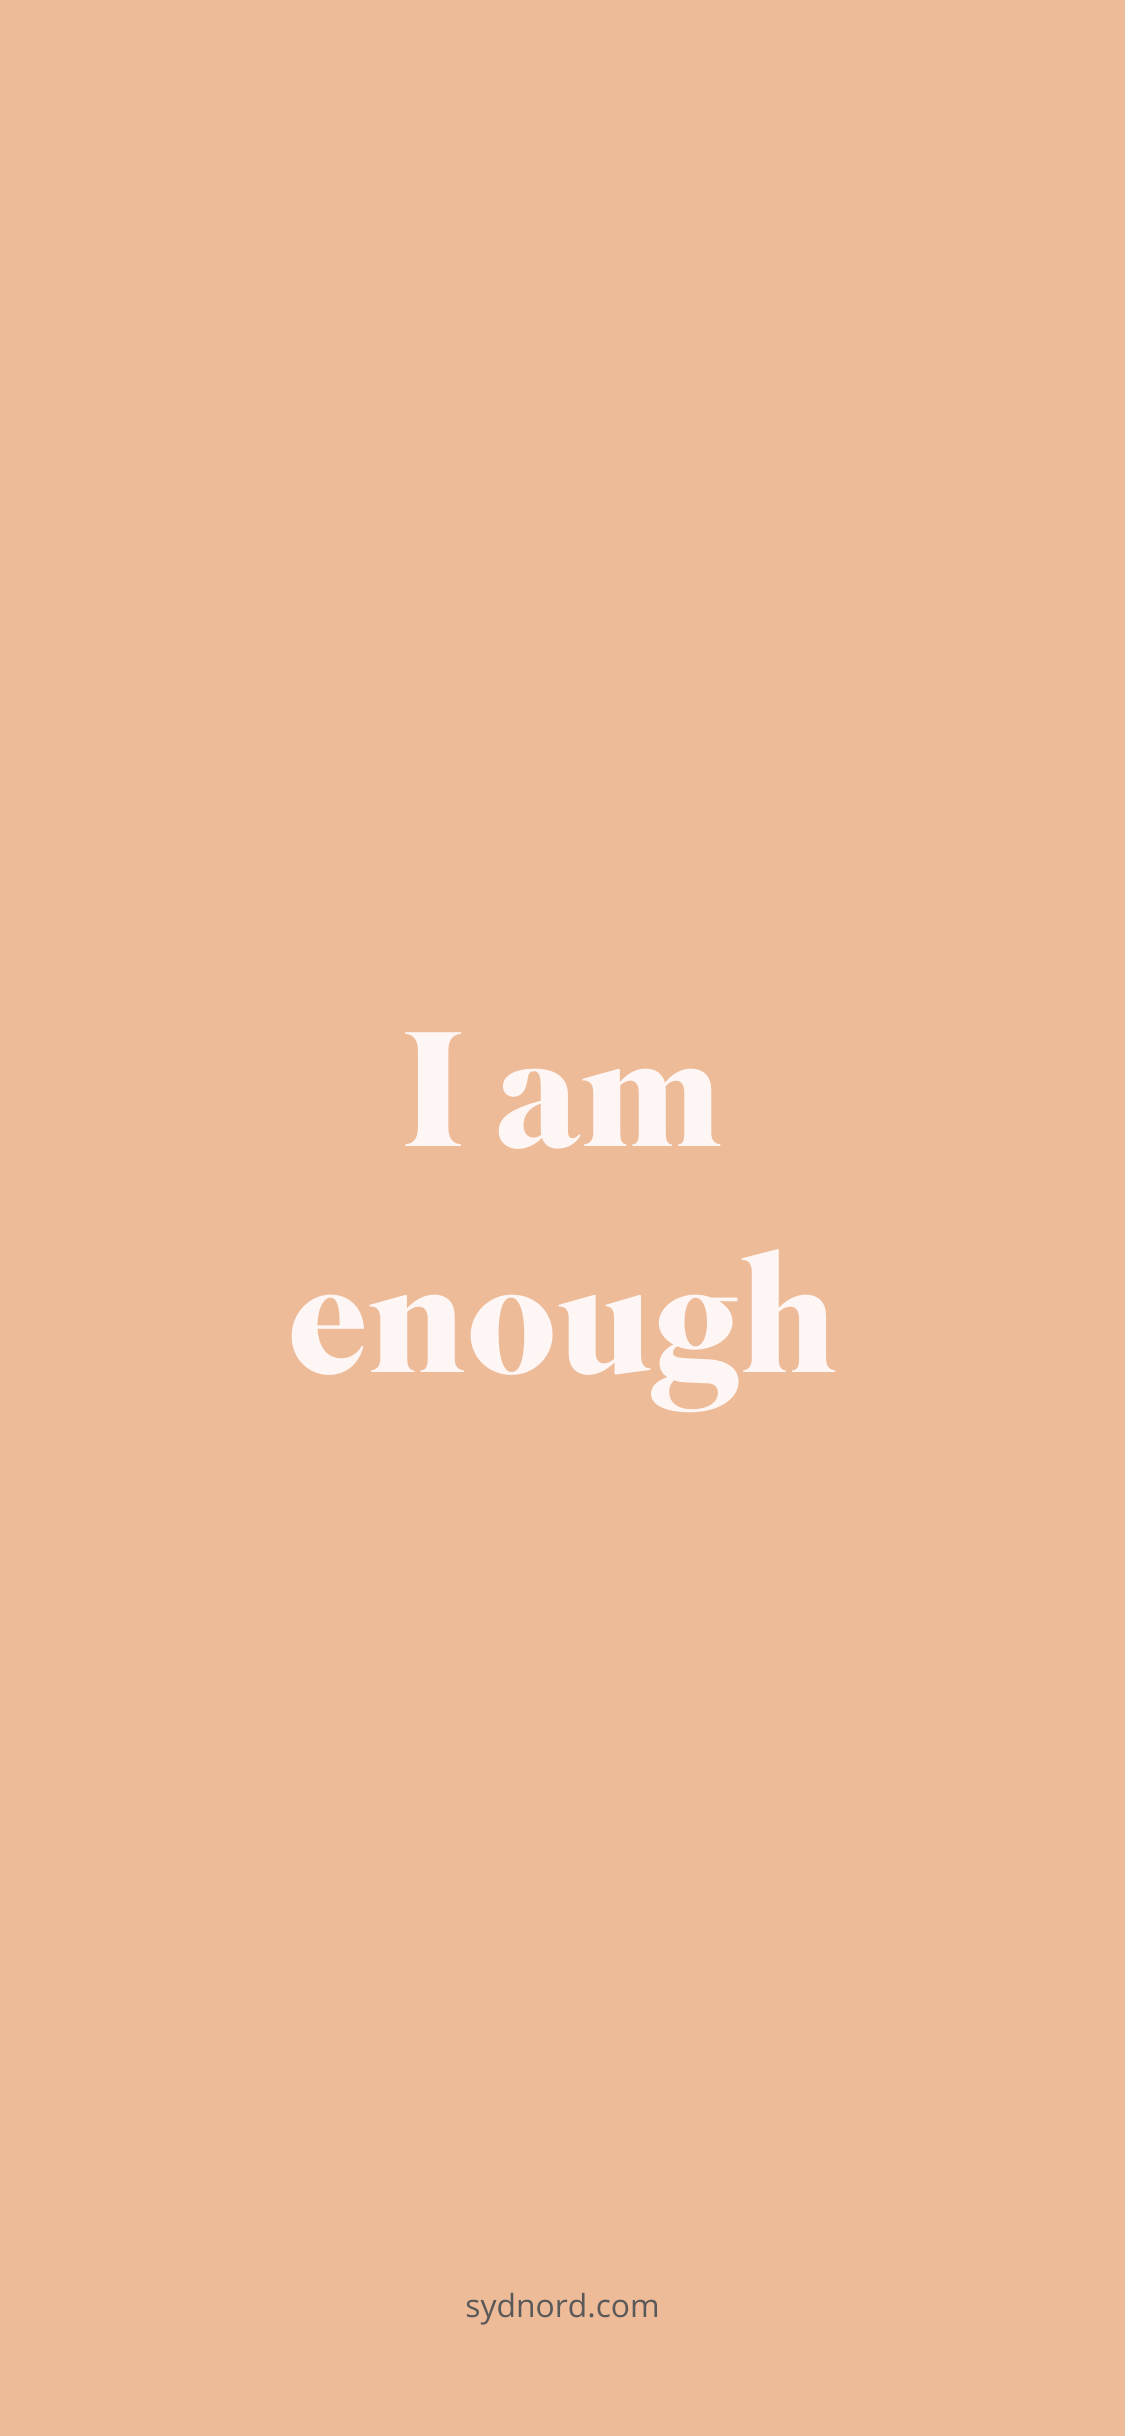 The ultimate positive quote: I am enough